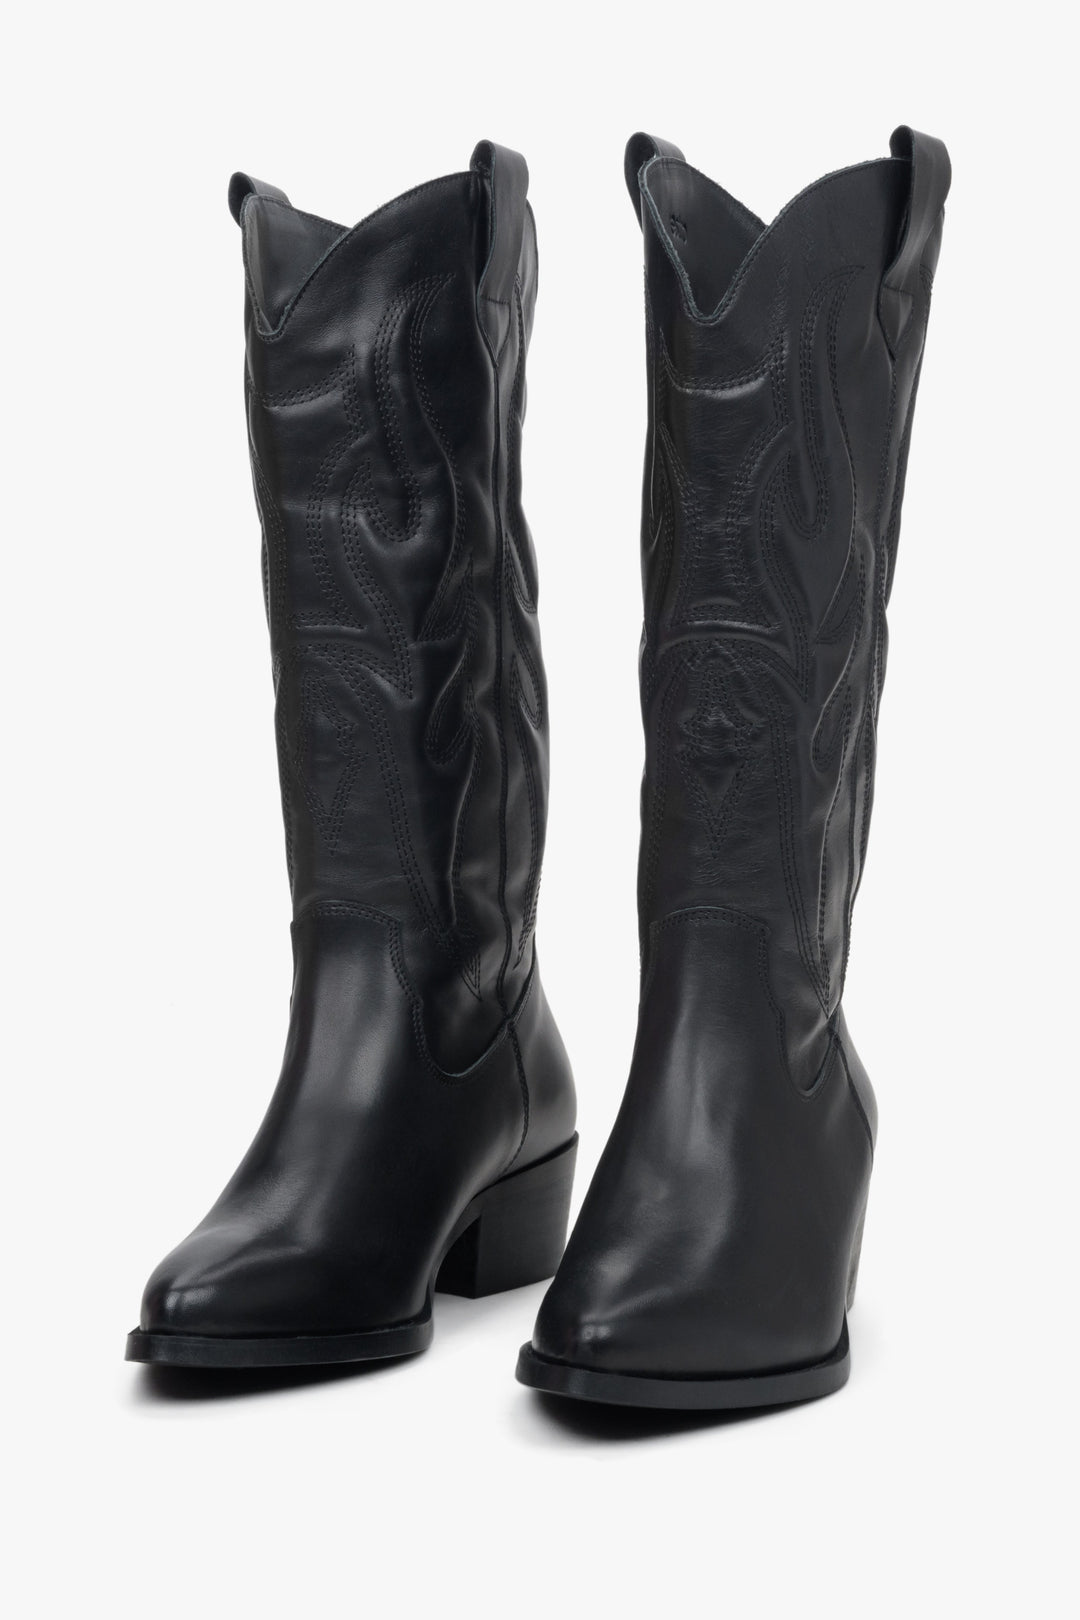 Women's black leather cowboy boots - frontal presentation of the model.